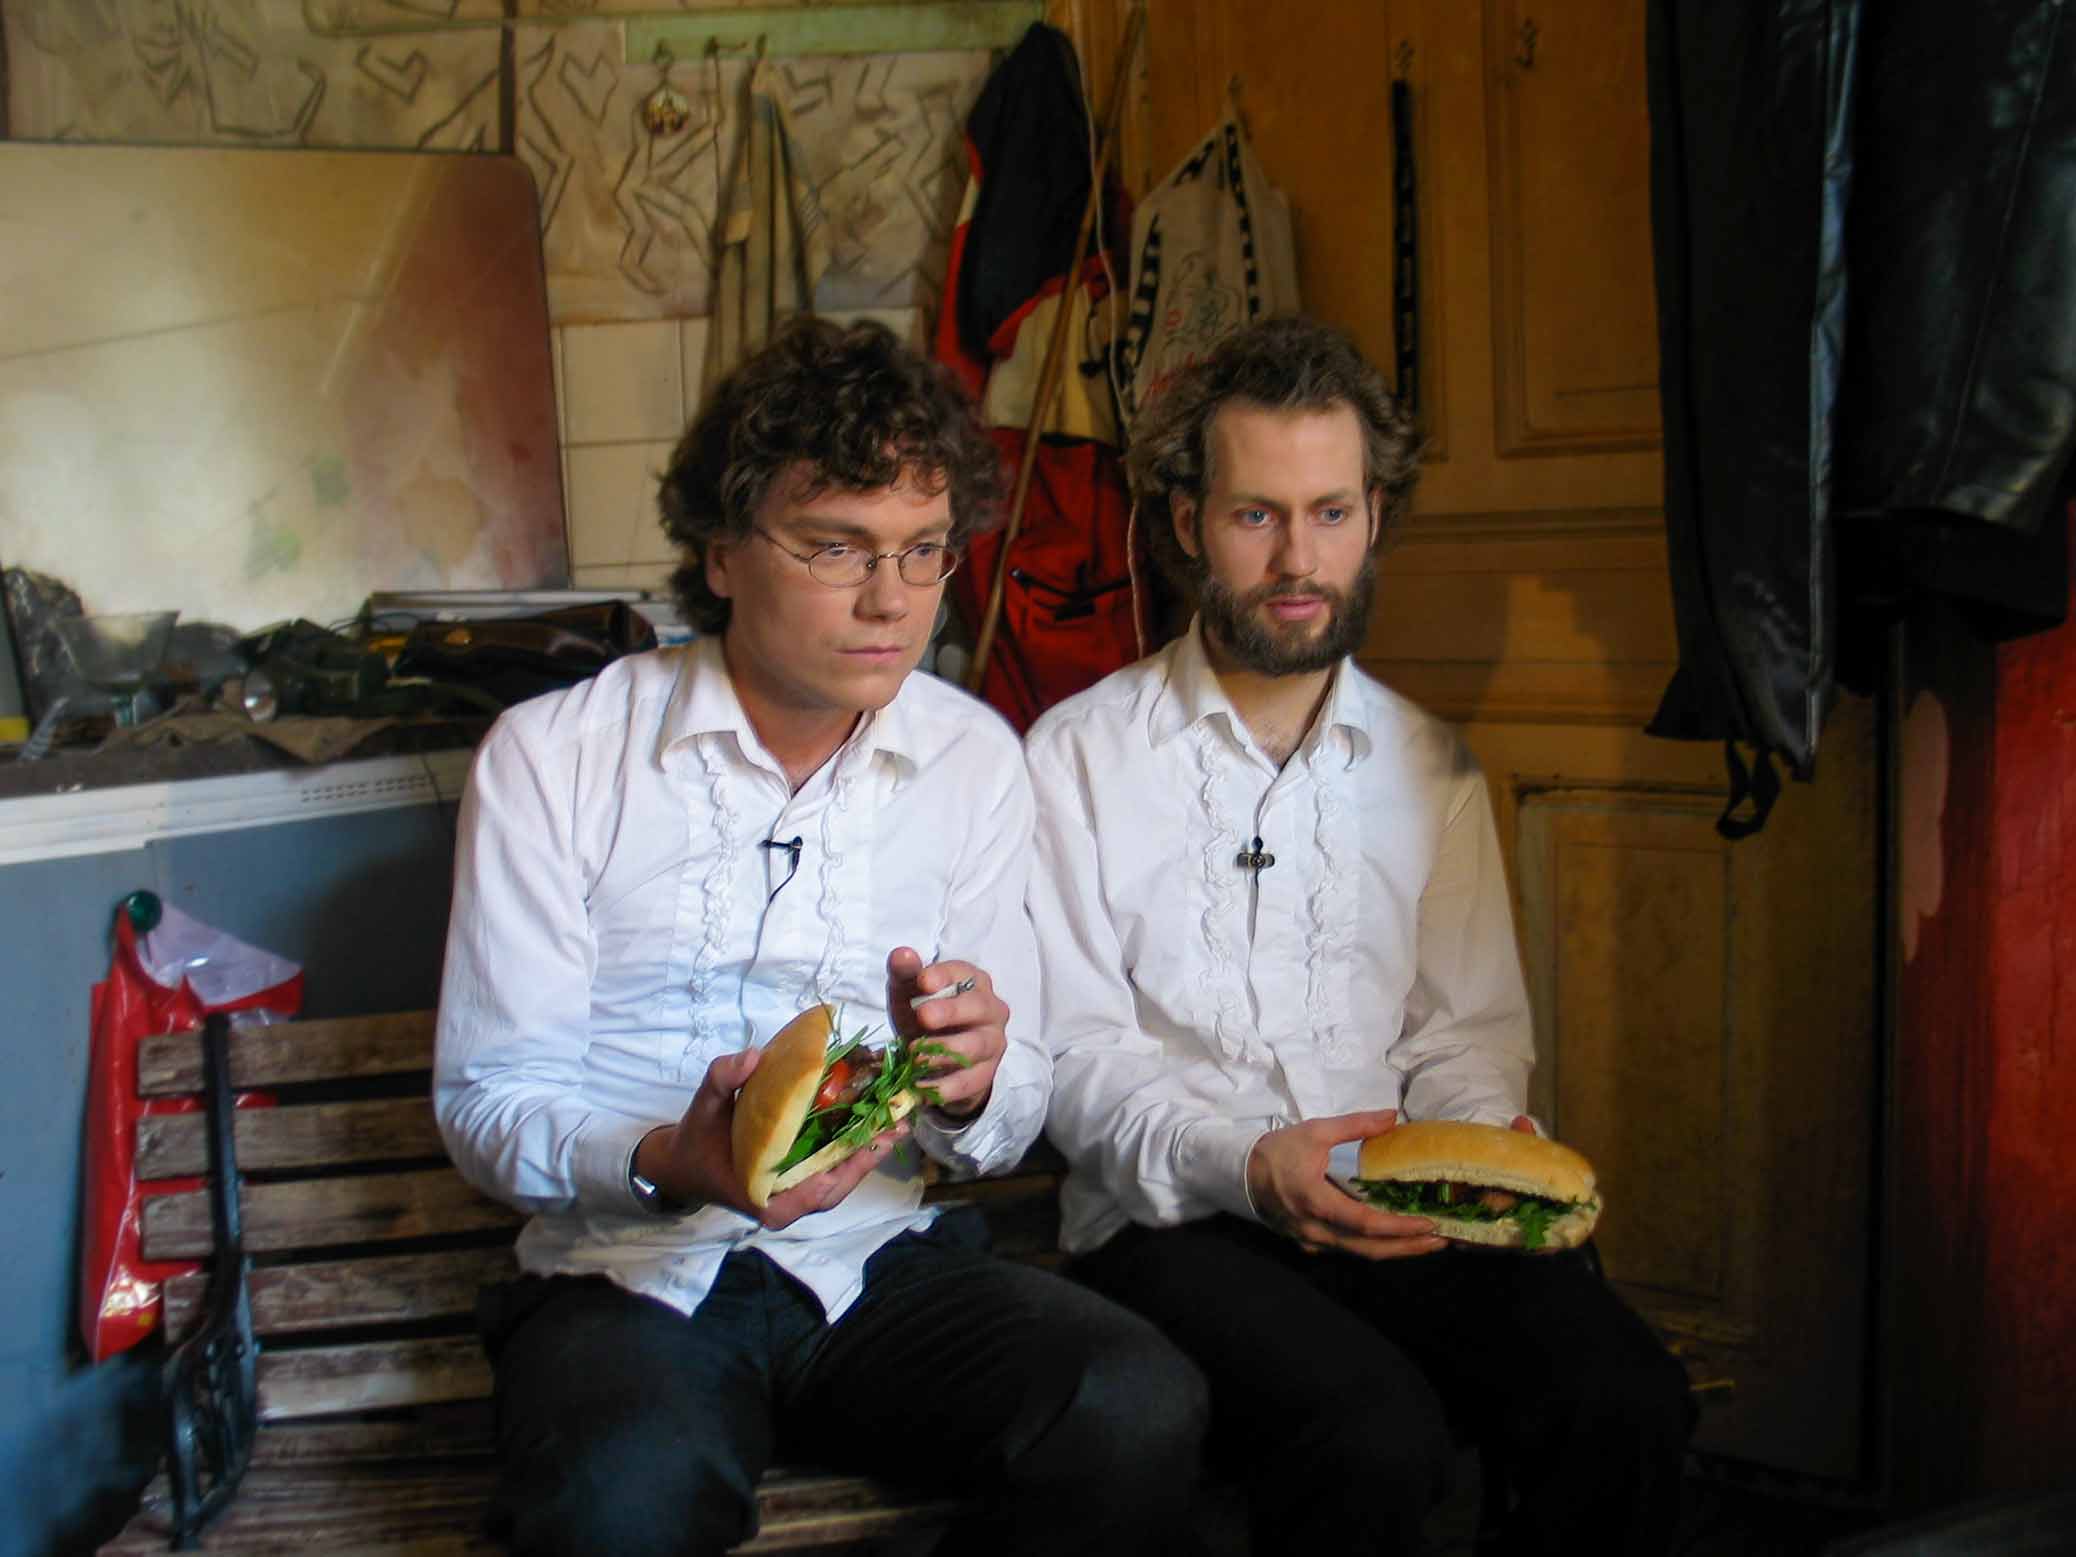 Cuisine Bizarre, video still, Frans Einarsson and Björn Perborg with sandwiches and cigarette.